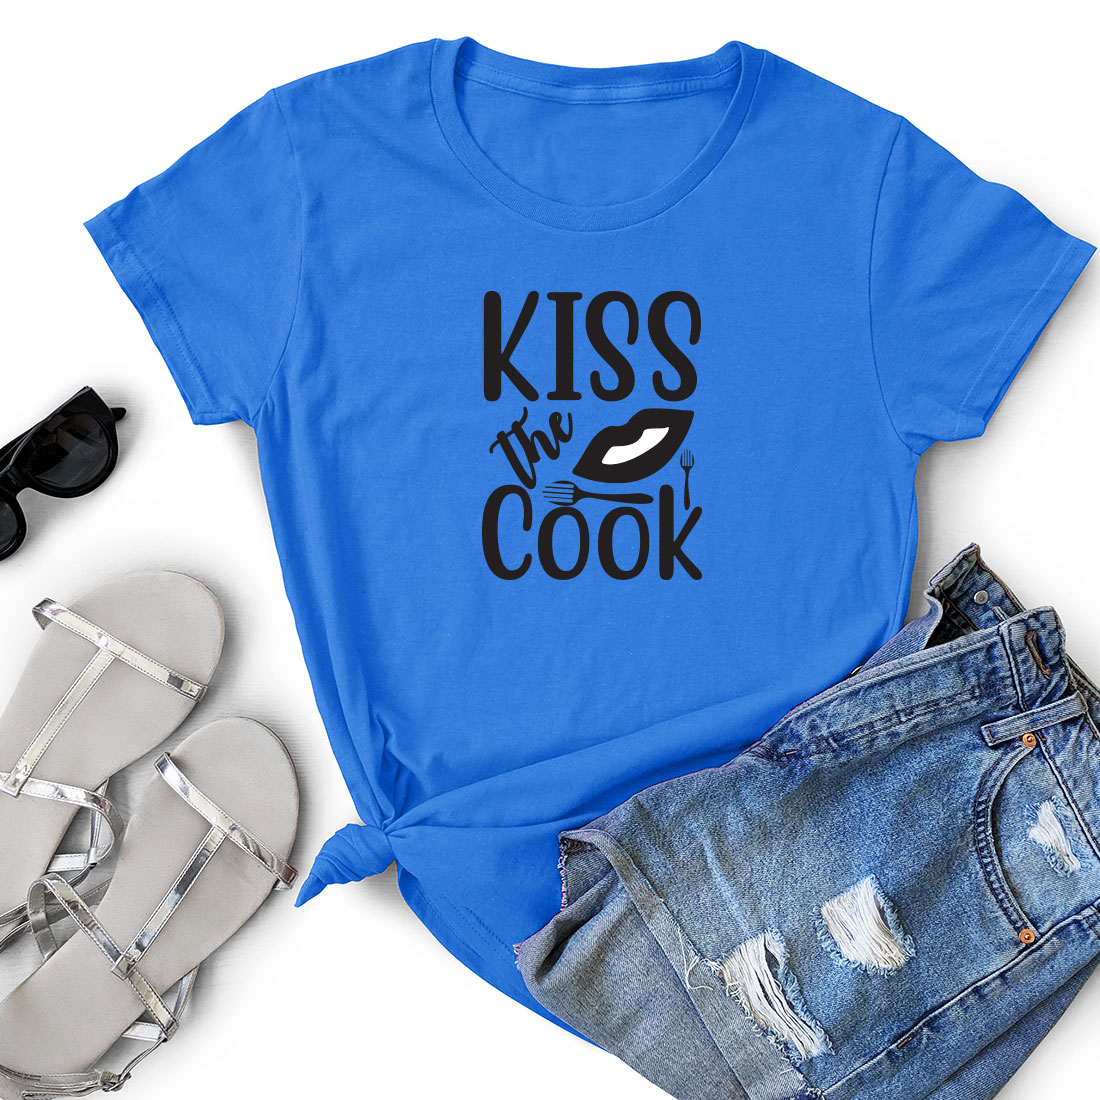 Blue shirt with the words kiss the cook on it.